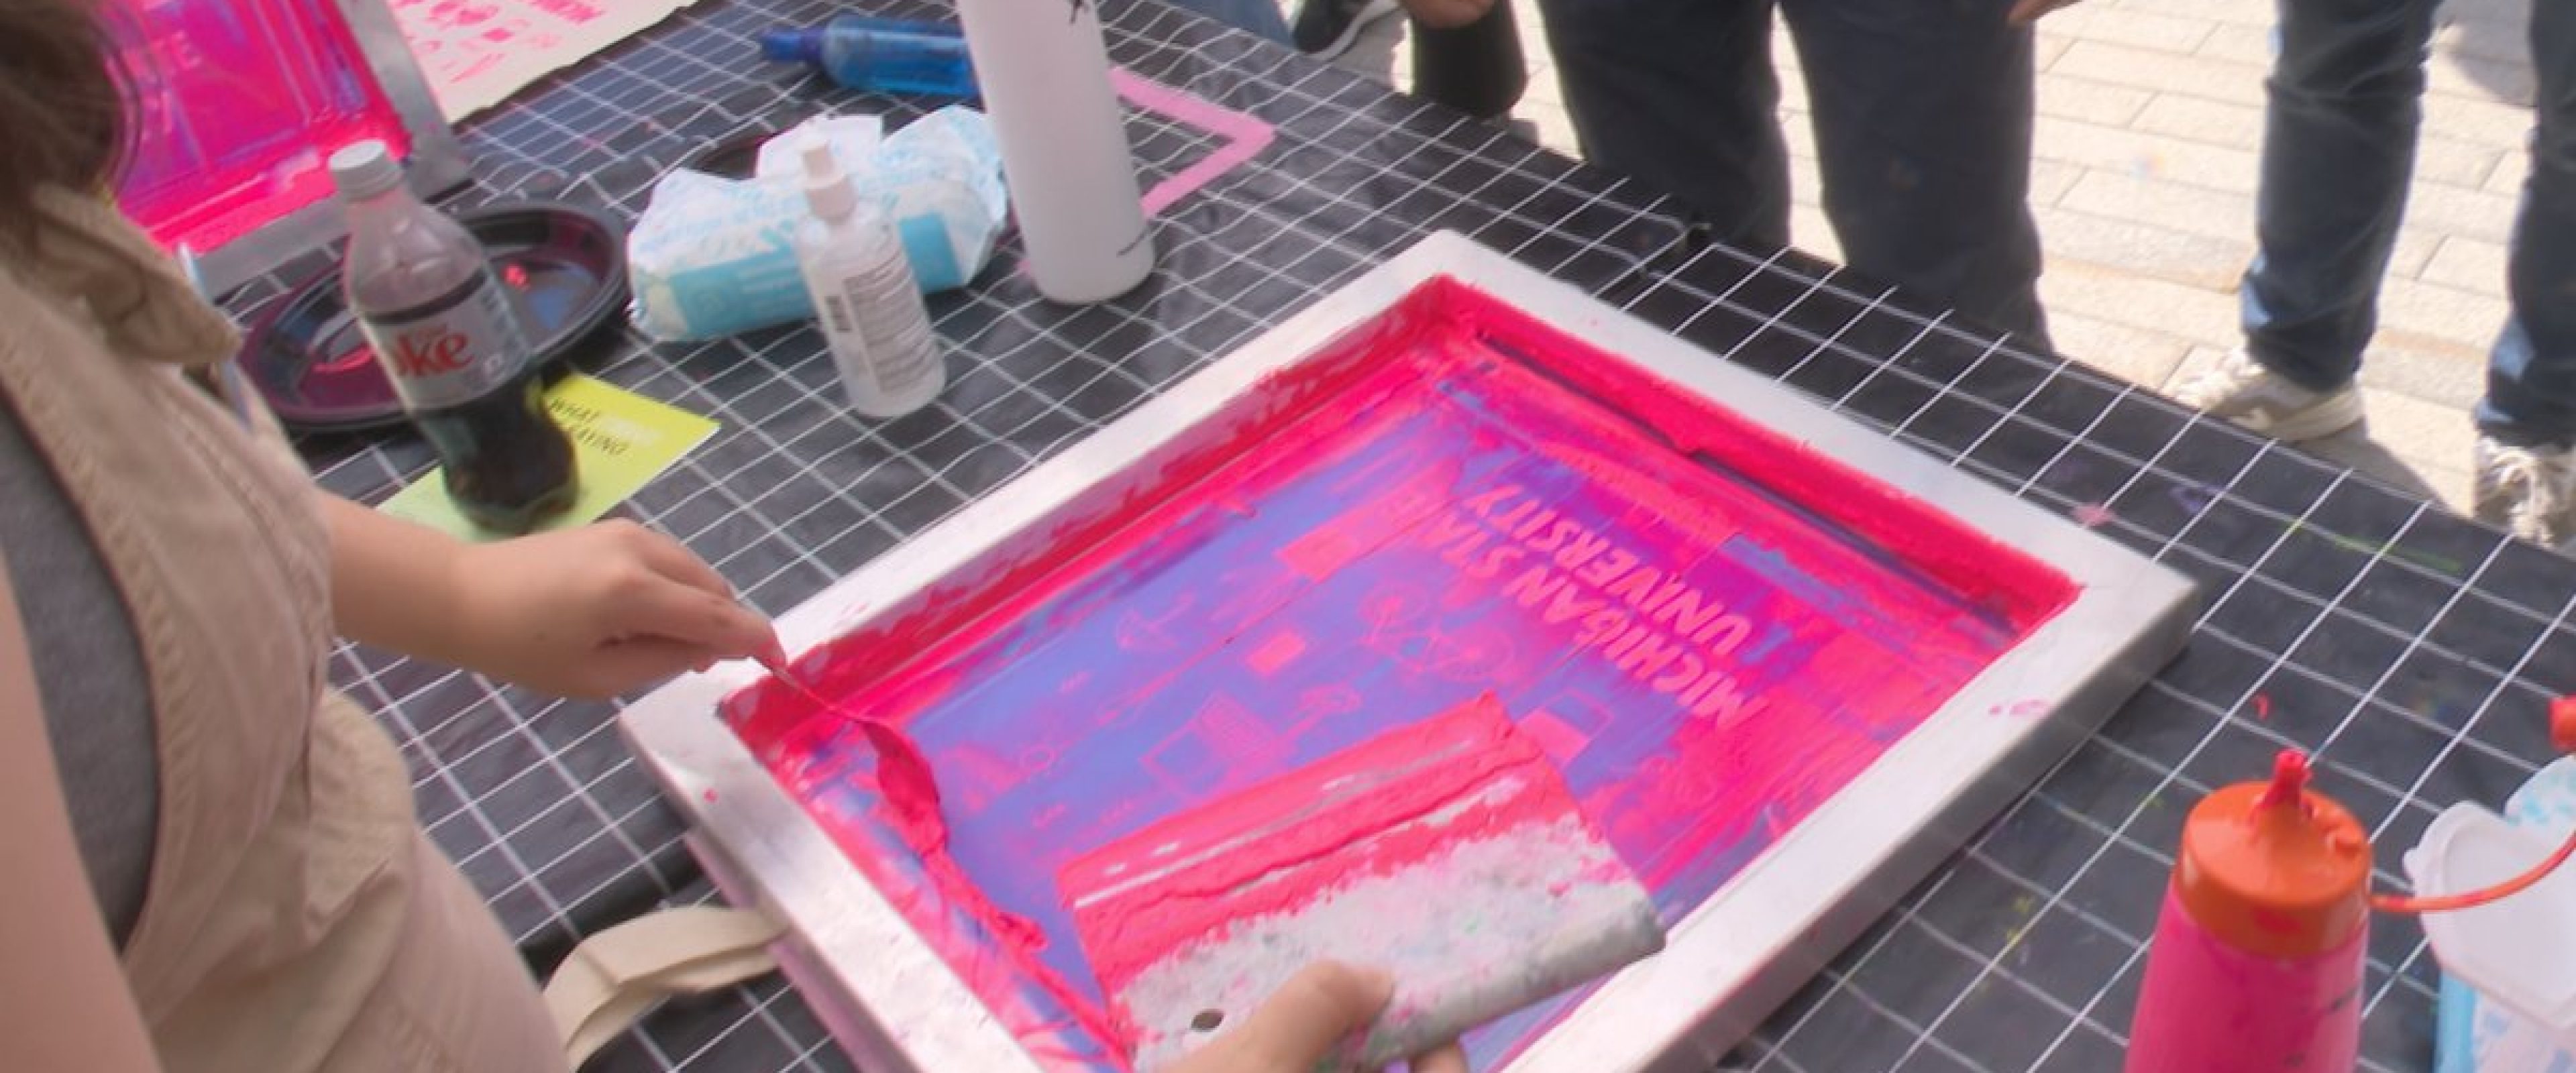 Someone using a screen print with pink ink